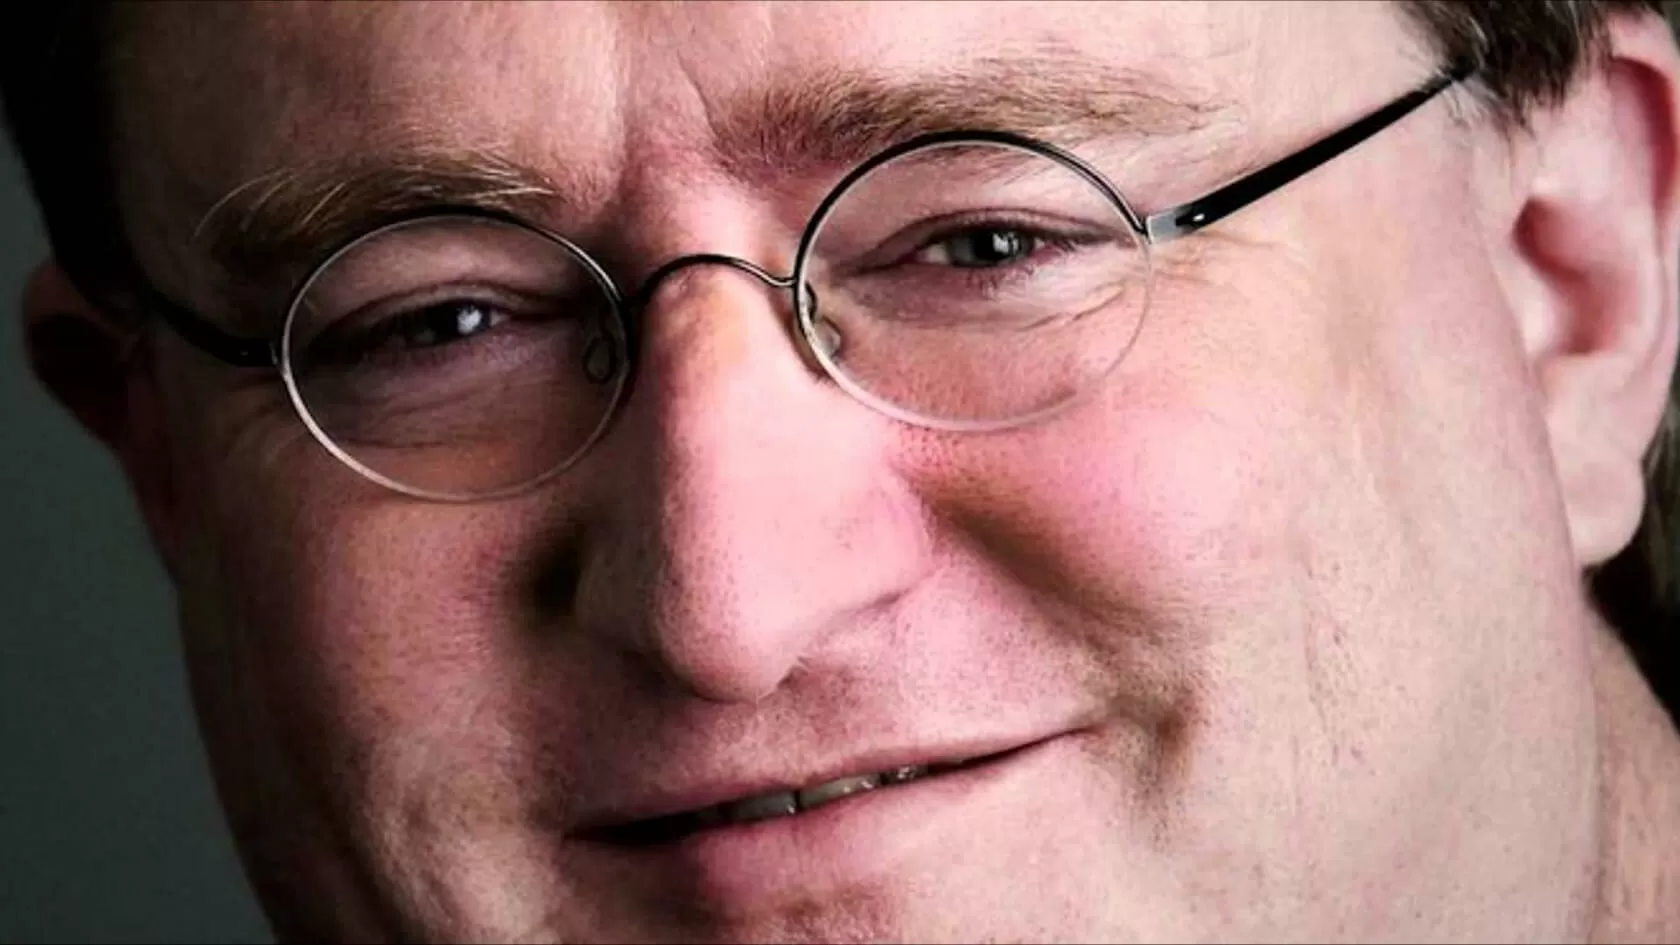 Gabe Newell's $5.5 billion net worth makes him one of the 100 richest people in the US